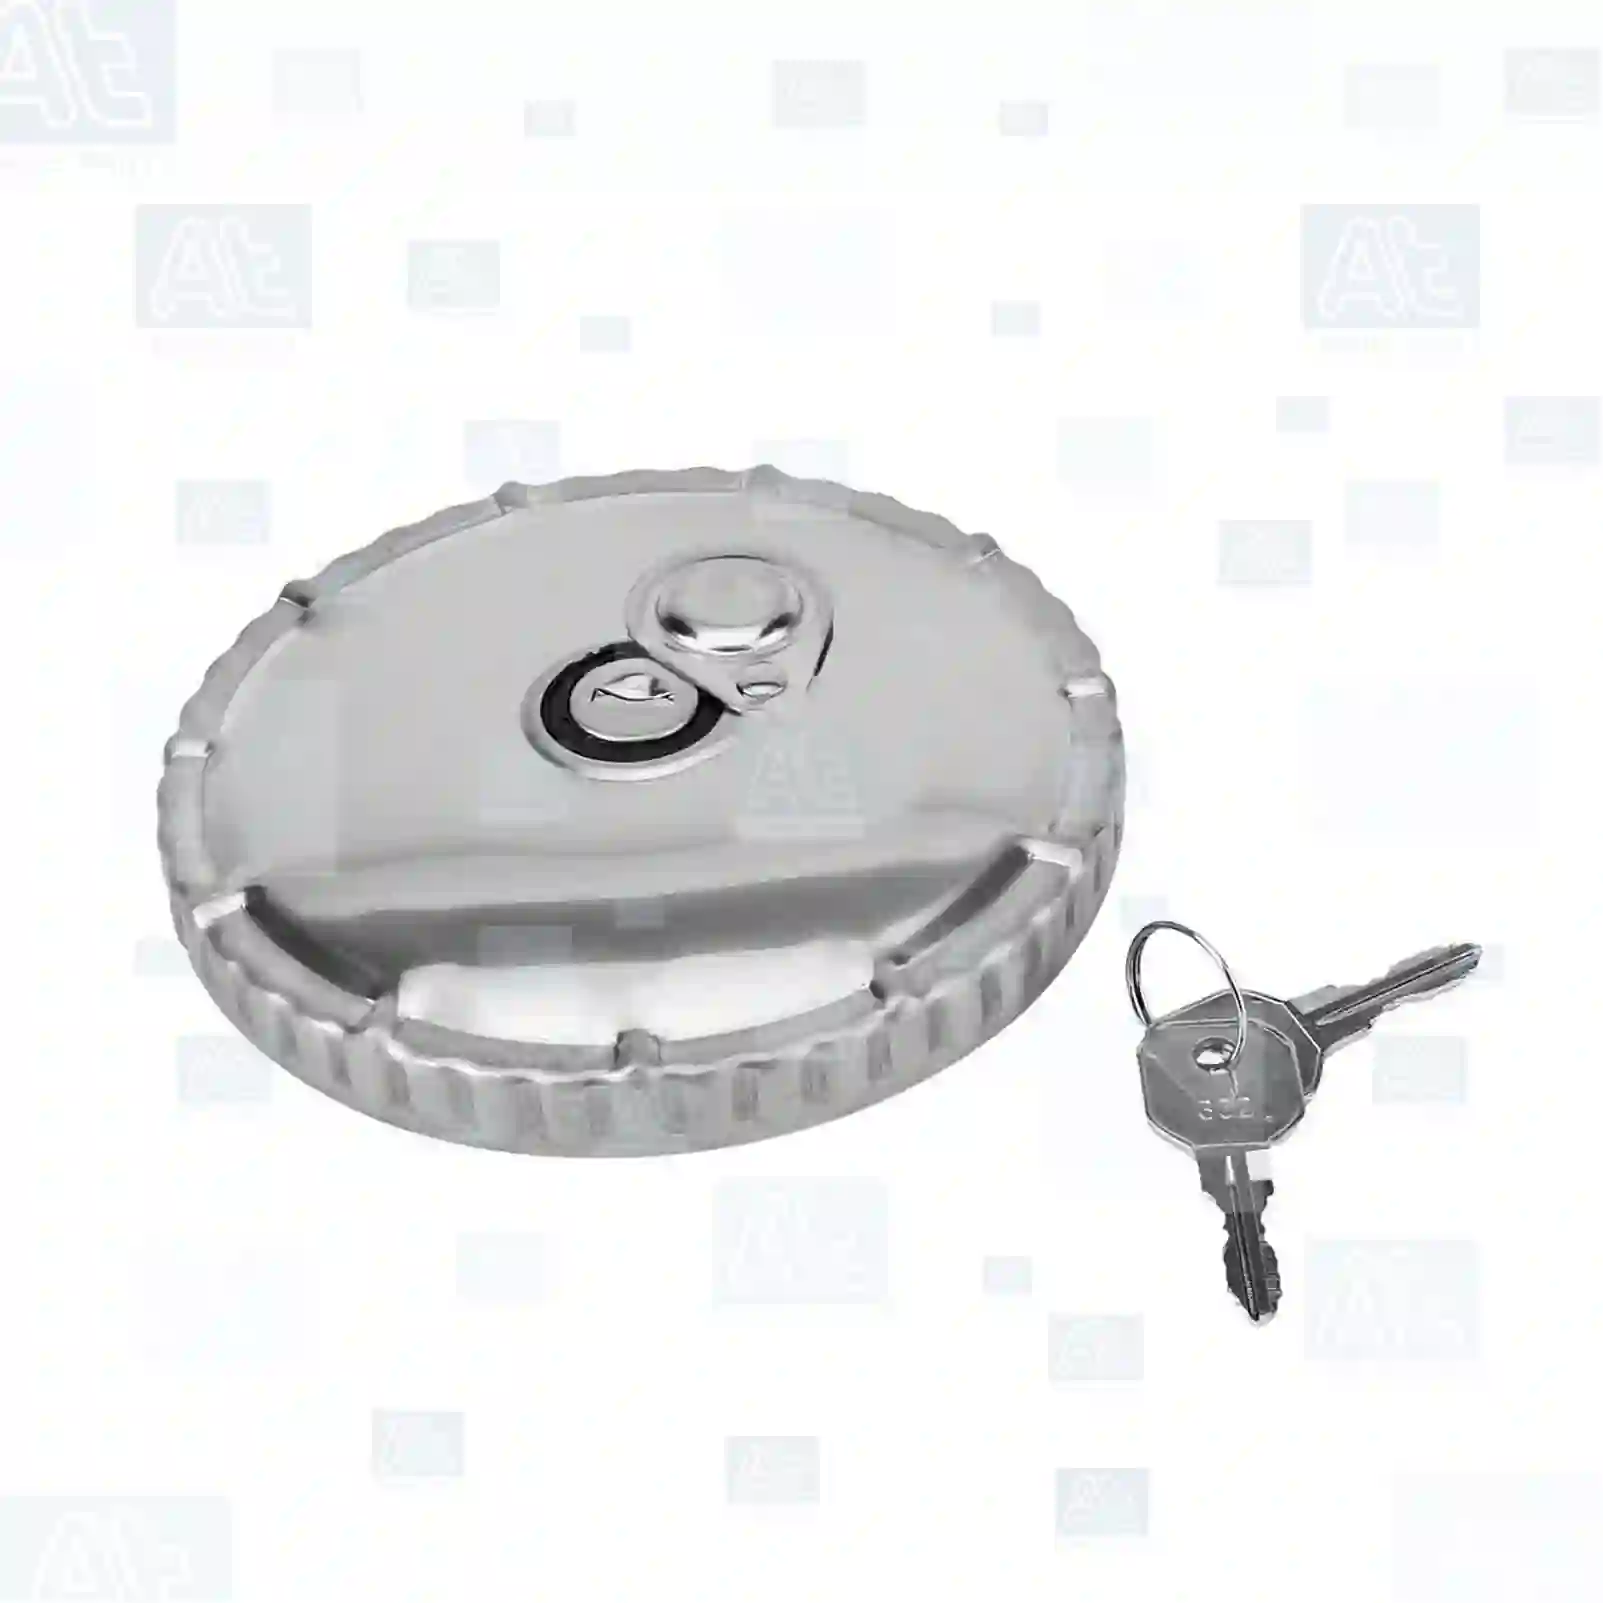 Filler cap, ventilated, lockable, at no 77723311, oem no: 879737, 81122100002, 81122100011, 81122100012, 81122100031, 81122100035, 81122100038, 81122100039, 81122100043, 81122100044, 81122100052, 81122100069, 81122100070, 81122100076, 81122106014, 81122107003, 81122100027, 82122100002, 82122100003, 82122100011, 82122100012, 83122100521, 84122100005, 85100003575, 90800301107, N1011002363, 0004711230, 3024700130, 3024710130, ZG10554-0008 At Spare Part | Engine, Accelerator Pedal, Camshaft, Connecting Rod, Crankcase, Crankshaft, Cylinder Head, Engine Suspension Mountings, Exhaust Manifold, Exhaust Gas Recirculation, Filter Kits, Flywheel Housing, General Overhaul Kits, Engine, Intake Manifold, Oil Cleaner, Oil Cooler, Oil Filter, Oil Pump, Oil Sump, Piston & Liner, Sensor & Switch, Timing Case, Turbocharger, Cooling System, Belt Tensioner, Coolant Filter, Coolant Pipe, Corrosion Prevention Agent, Drive, Expansion Tank, Fan, Intercooler, Monitors & Gauges, Radiator, Thermostat, V-Belt / Timing belt, Water Pump, Fuel System, Electronical Injector Unit, Feed Pump, Fuel Filter, cpl., Fuel Gauge Sender,  Fuel Line, Fuel Pump, Fuel Tank, Injection Line Kit, Injection Pump, Exhaust System, Clutch & Pedal, Gearbox, Propeller Shaft, Axles, Brake System, Hubs & Wheels, Suspension, Leaf Spring, Universal Parts / Accessories, Steering, Electrical System, Cabin Filler cap, ventilated, lockable, at no 77723311, oem no: 879737, 81122100002, 81122100011, 81122100012, 81122100031, 81122100035, 81122100038, 81122100039, 81122100043, 81122100044, 81122100052, 81122100069, 81122100070, 81122100076, 81122106014, 81122107003, 81122100027, 82122100002, 82122100003, 82122100011, 82122100012, 83122100521, 84122100005, 85100003575, 90800301107, N1011002363, 0004711230, 3024700130, 3024710130, ZG10554-0008 At Spare Part | Engine, Accelerator Pedal, Camshaft, Connecting Rod, Crankcase, Crankshaft, Cylinder Head, Engine Suspension Mountings, Exhaust Manifold, Exhaust Gas Recirculation, Filter Kits, Flywheel Housing, General Overhaul Kits, Engine, Intake Manifold, Oil Cleaner, Oil Cooler, Oil Filter, Oil Pump, Oil Sump, Piston & Liner, Sensor & Switch, Timing Case, Turbocharger, Cooling System, Belt Tensioner, Coolant Filter, Coolant Pipe, Corrosion Prevention Agent, Drive, Expansion Tank, Fan, Intercooler, Monitors & Gauges, Radiator, Thermostat, V-Belt / Timing belt, Water Pump, Fuel System, Electronical Injector Unit, Feed Pump, Fuel Filter, cpl., Fuel Gauge Sender,  Fuel Line, Fuel Pump, Fuel Tank, Injection Line Kit, Injection Pump, Exhaust System, Clutch & Pedal, Gearbox, Propeller Shaft, Axles, Brake System, Hubs & Wheels, Suspension, Leaf Spring, Universal Parts / Accessories, Steering, Electrical System, Cabin